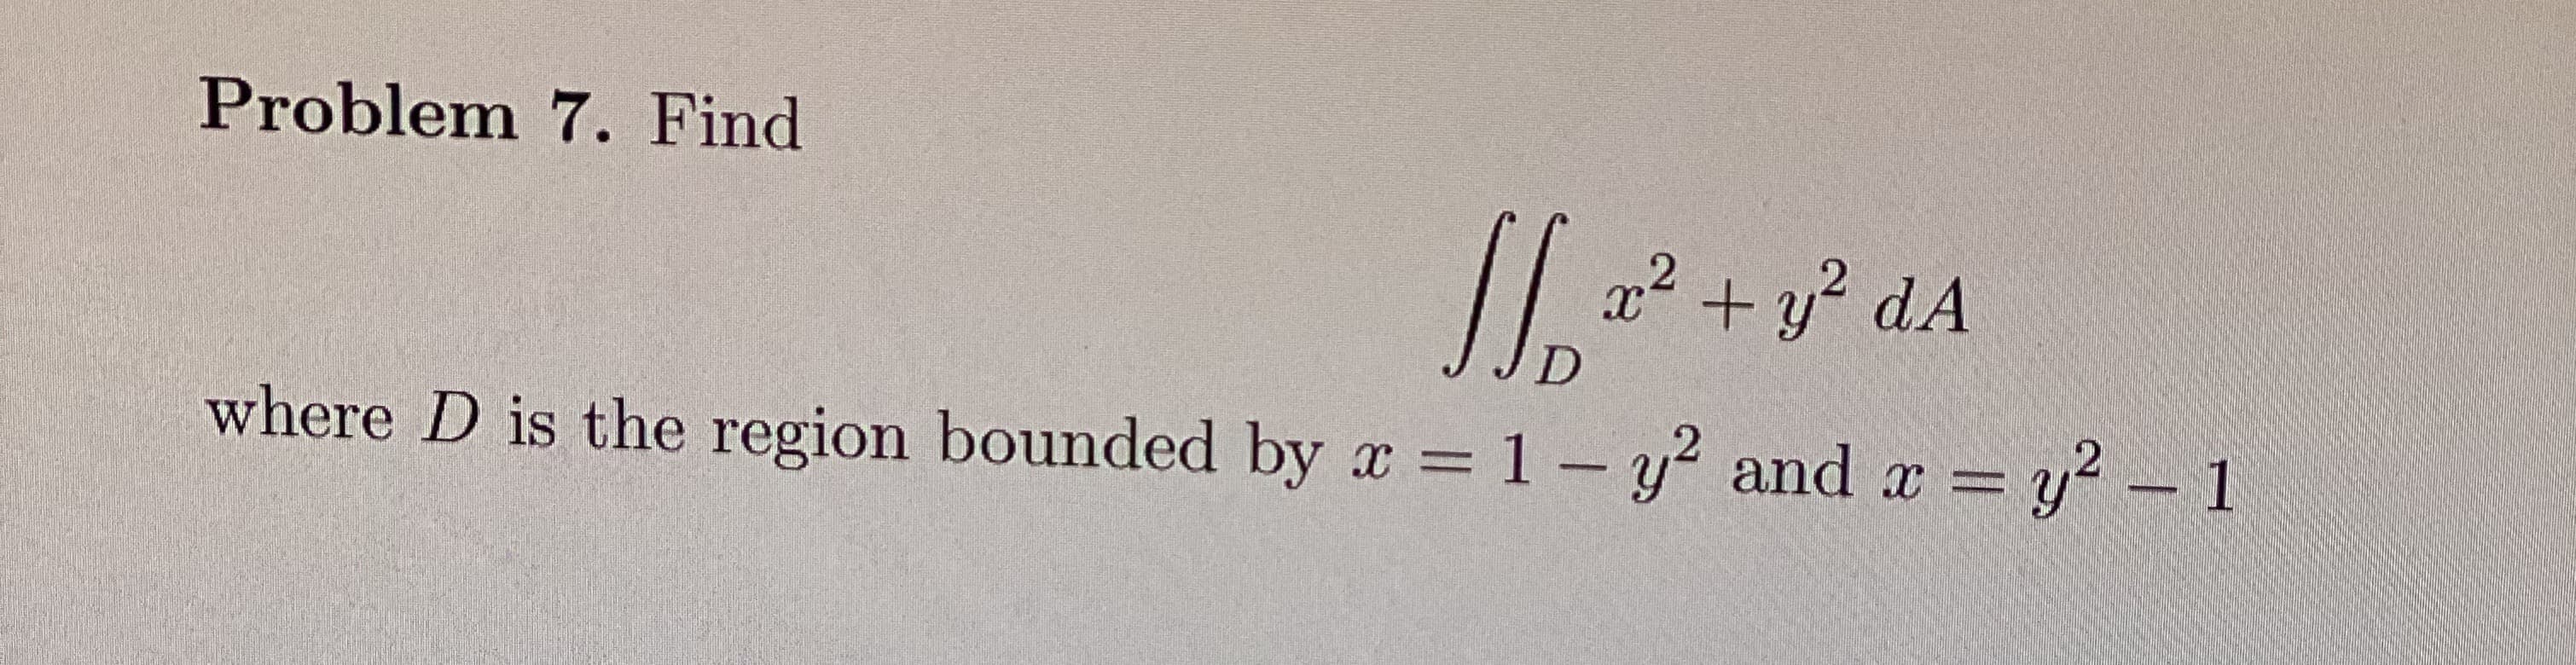 Problem 7. Find
+ y? dA
where D is the region bounded by x = 1- y? and x= y-1
